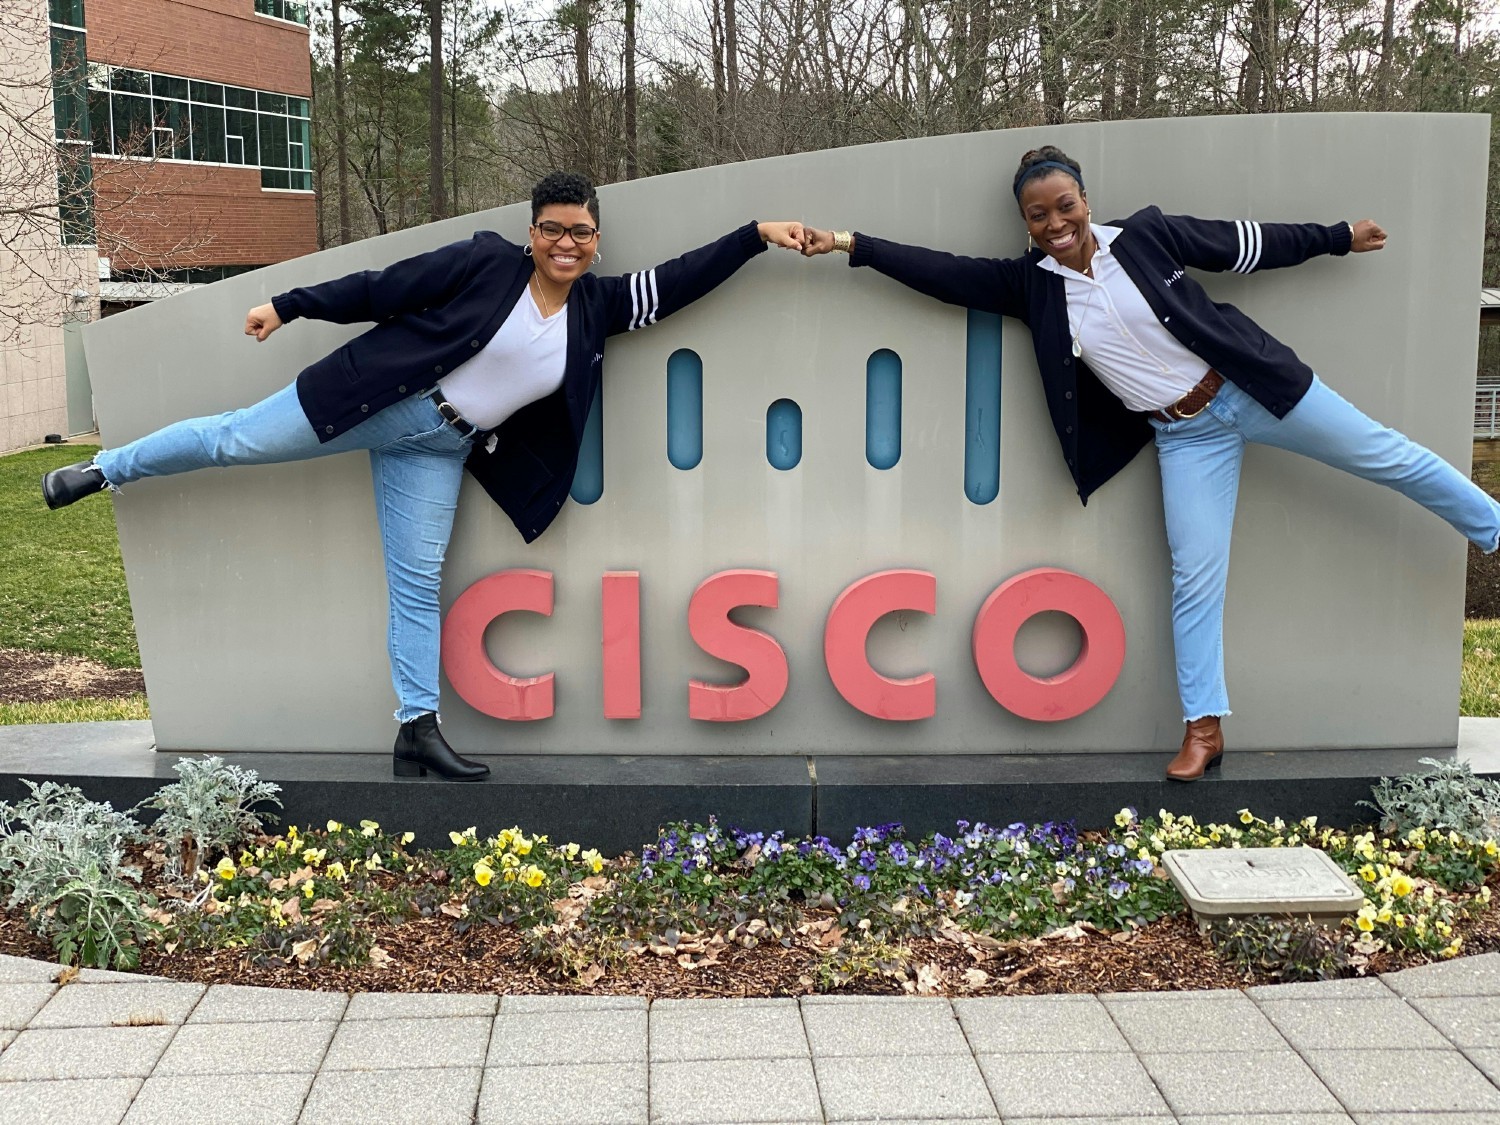 Making connections at Cisco